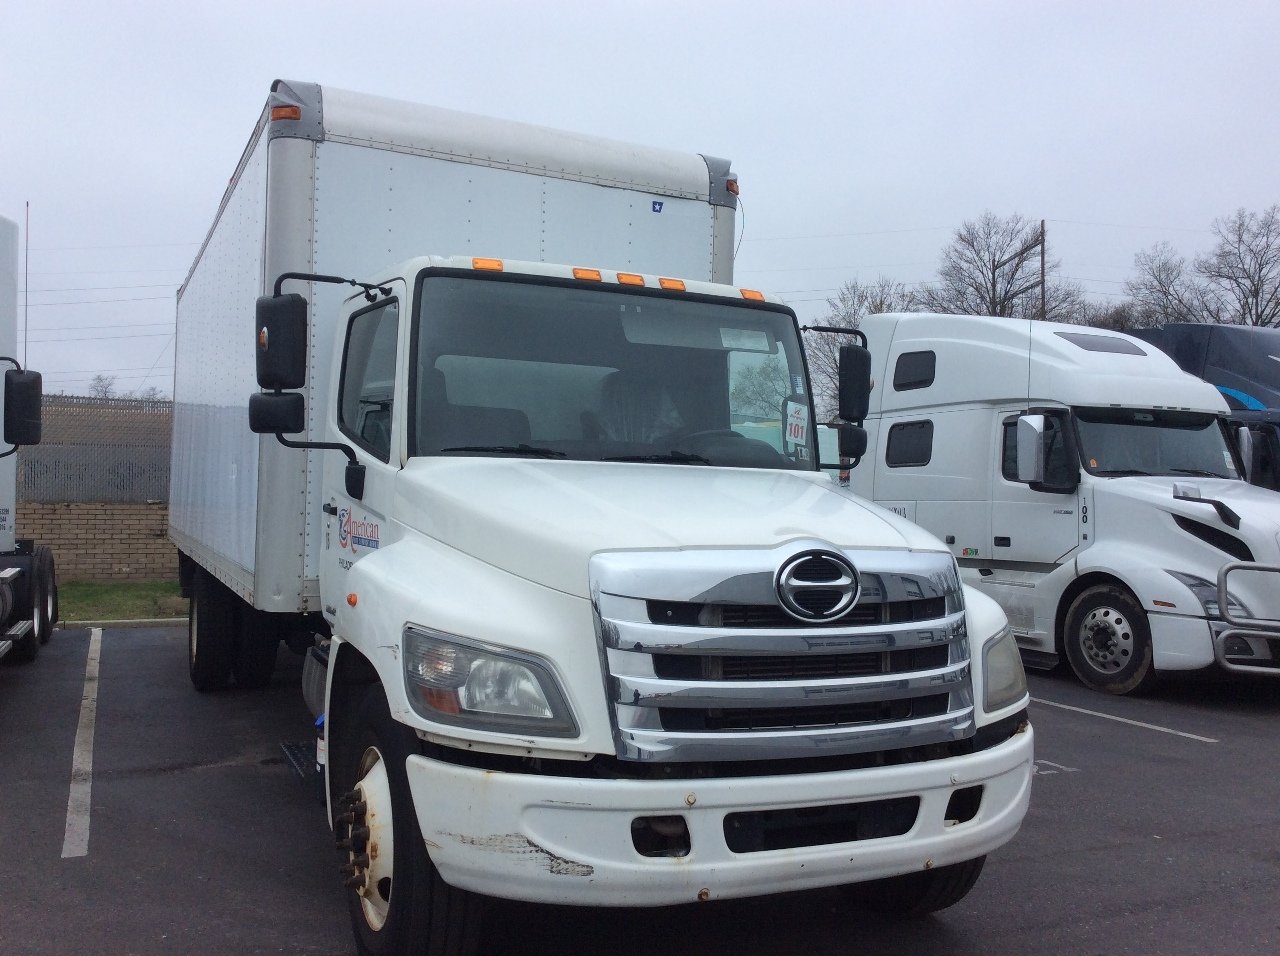 Used Truck Inventory - 1001821 02 2 - 98